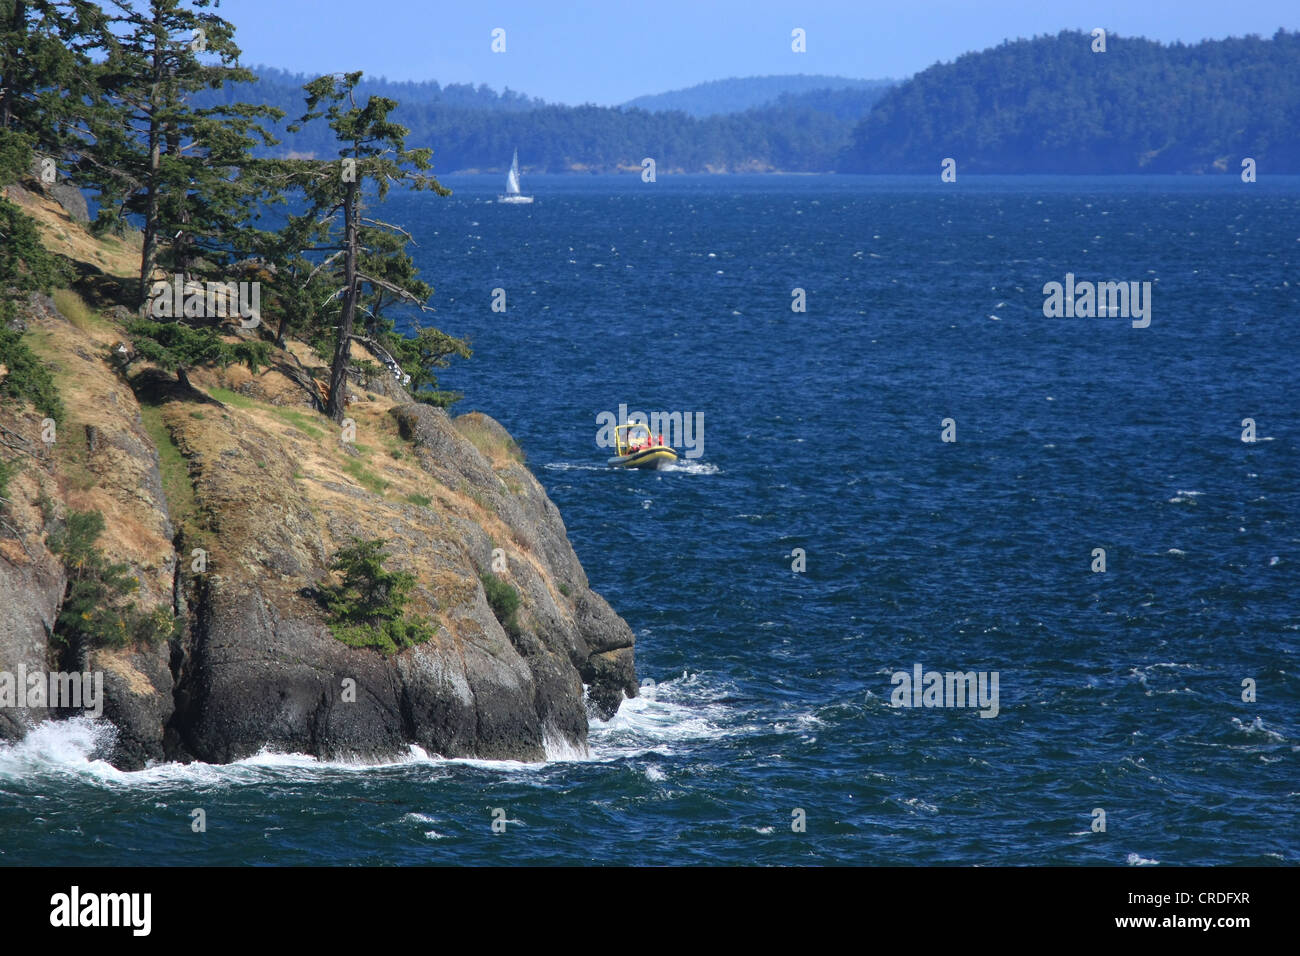 Whale watcher boat cruising in Swanson Channel along the shoreline near Boat Nook, Pender Island, BC, Canada Stock Photo